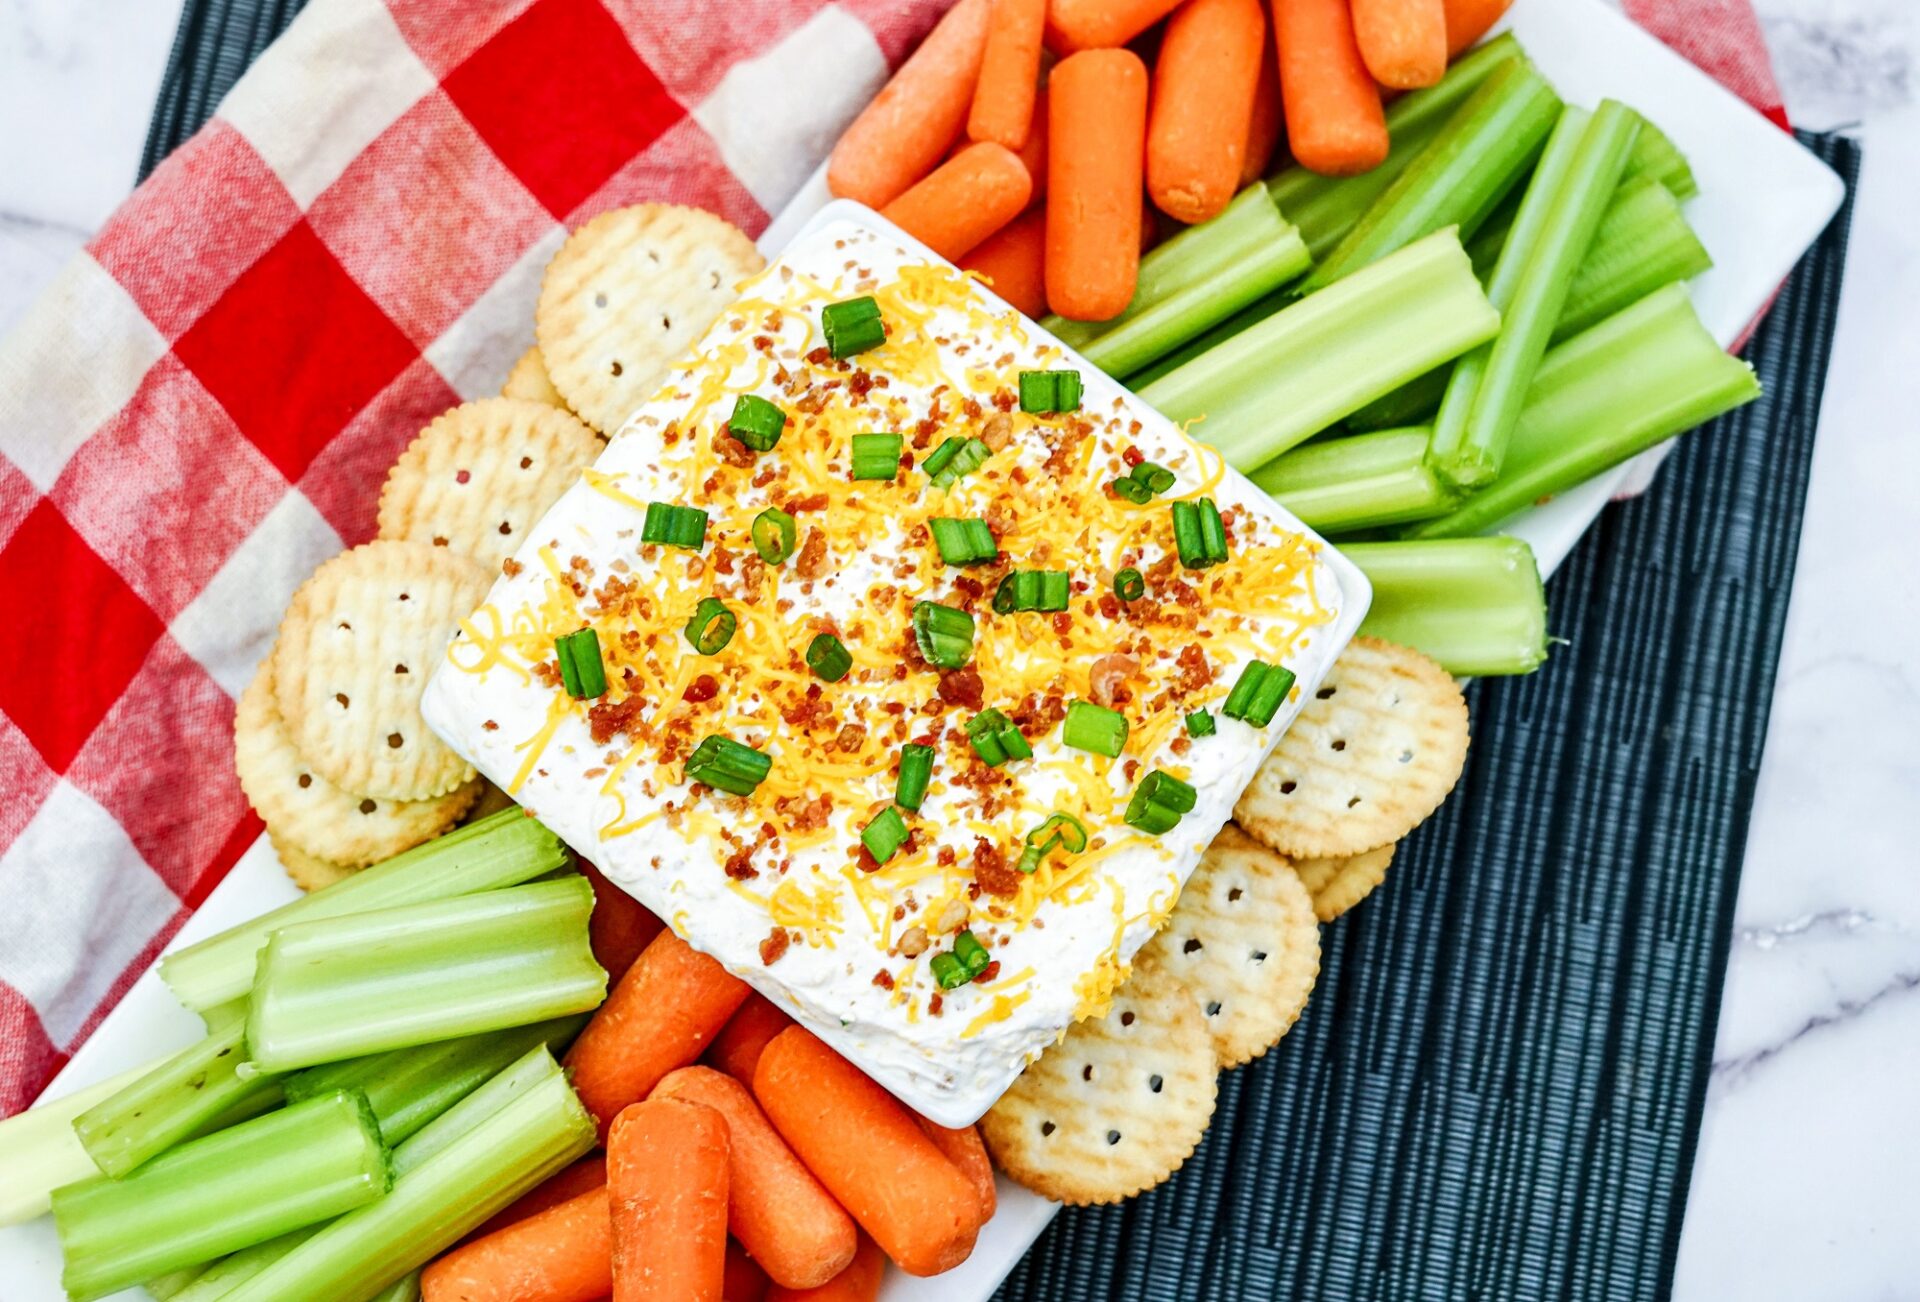 cheddar bacon ranch dip in a bowl surrounded by crackers and veggies.